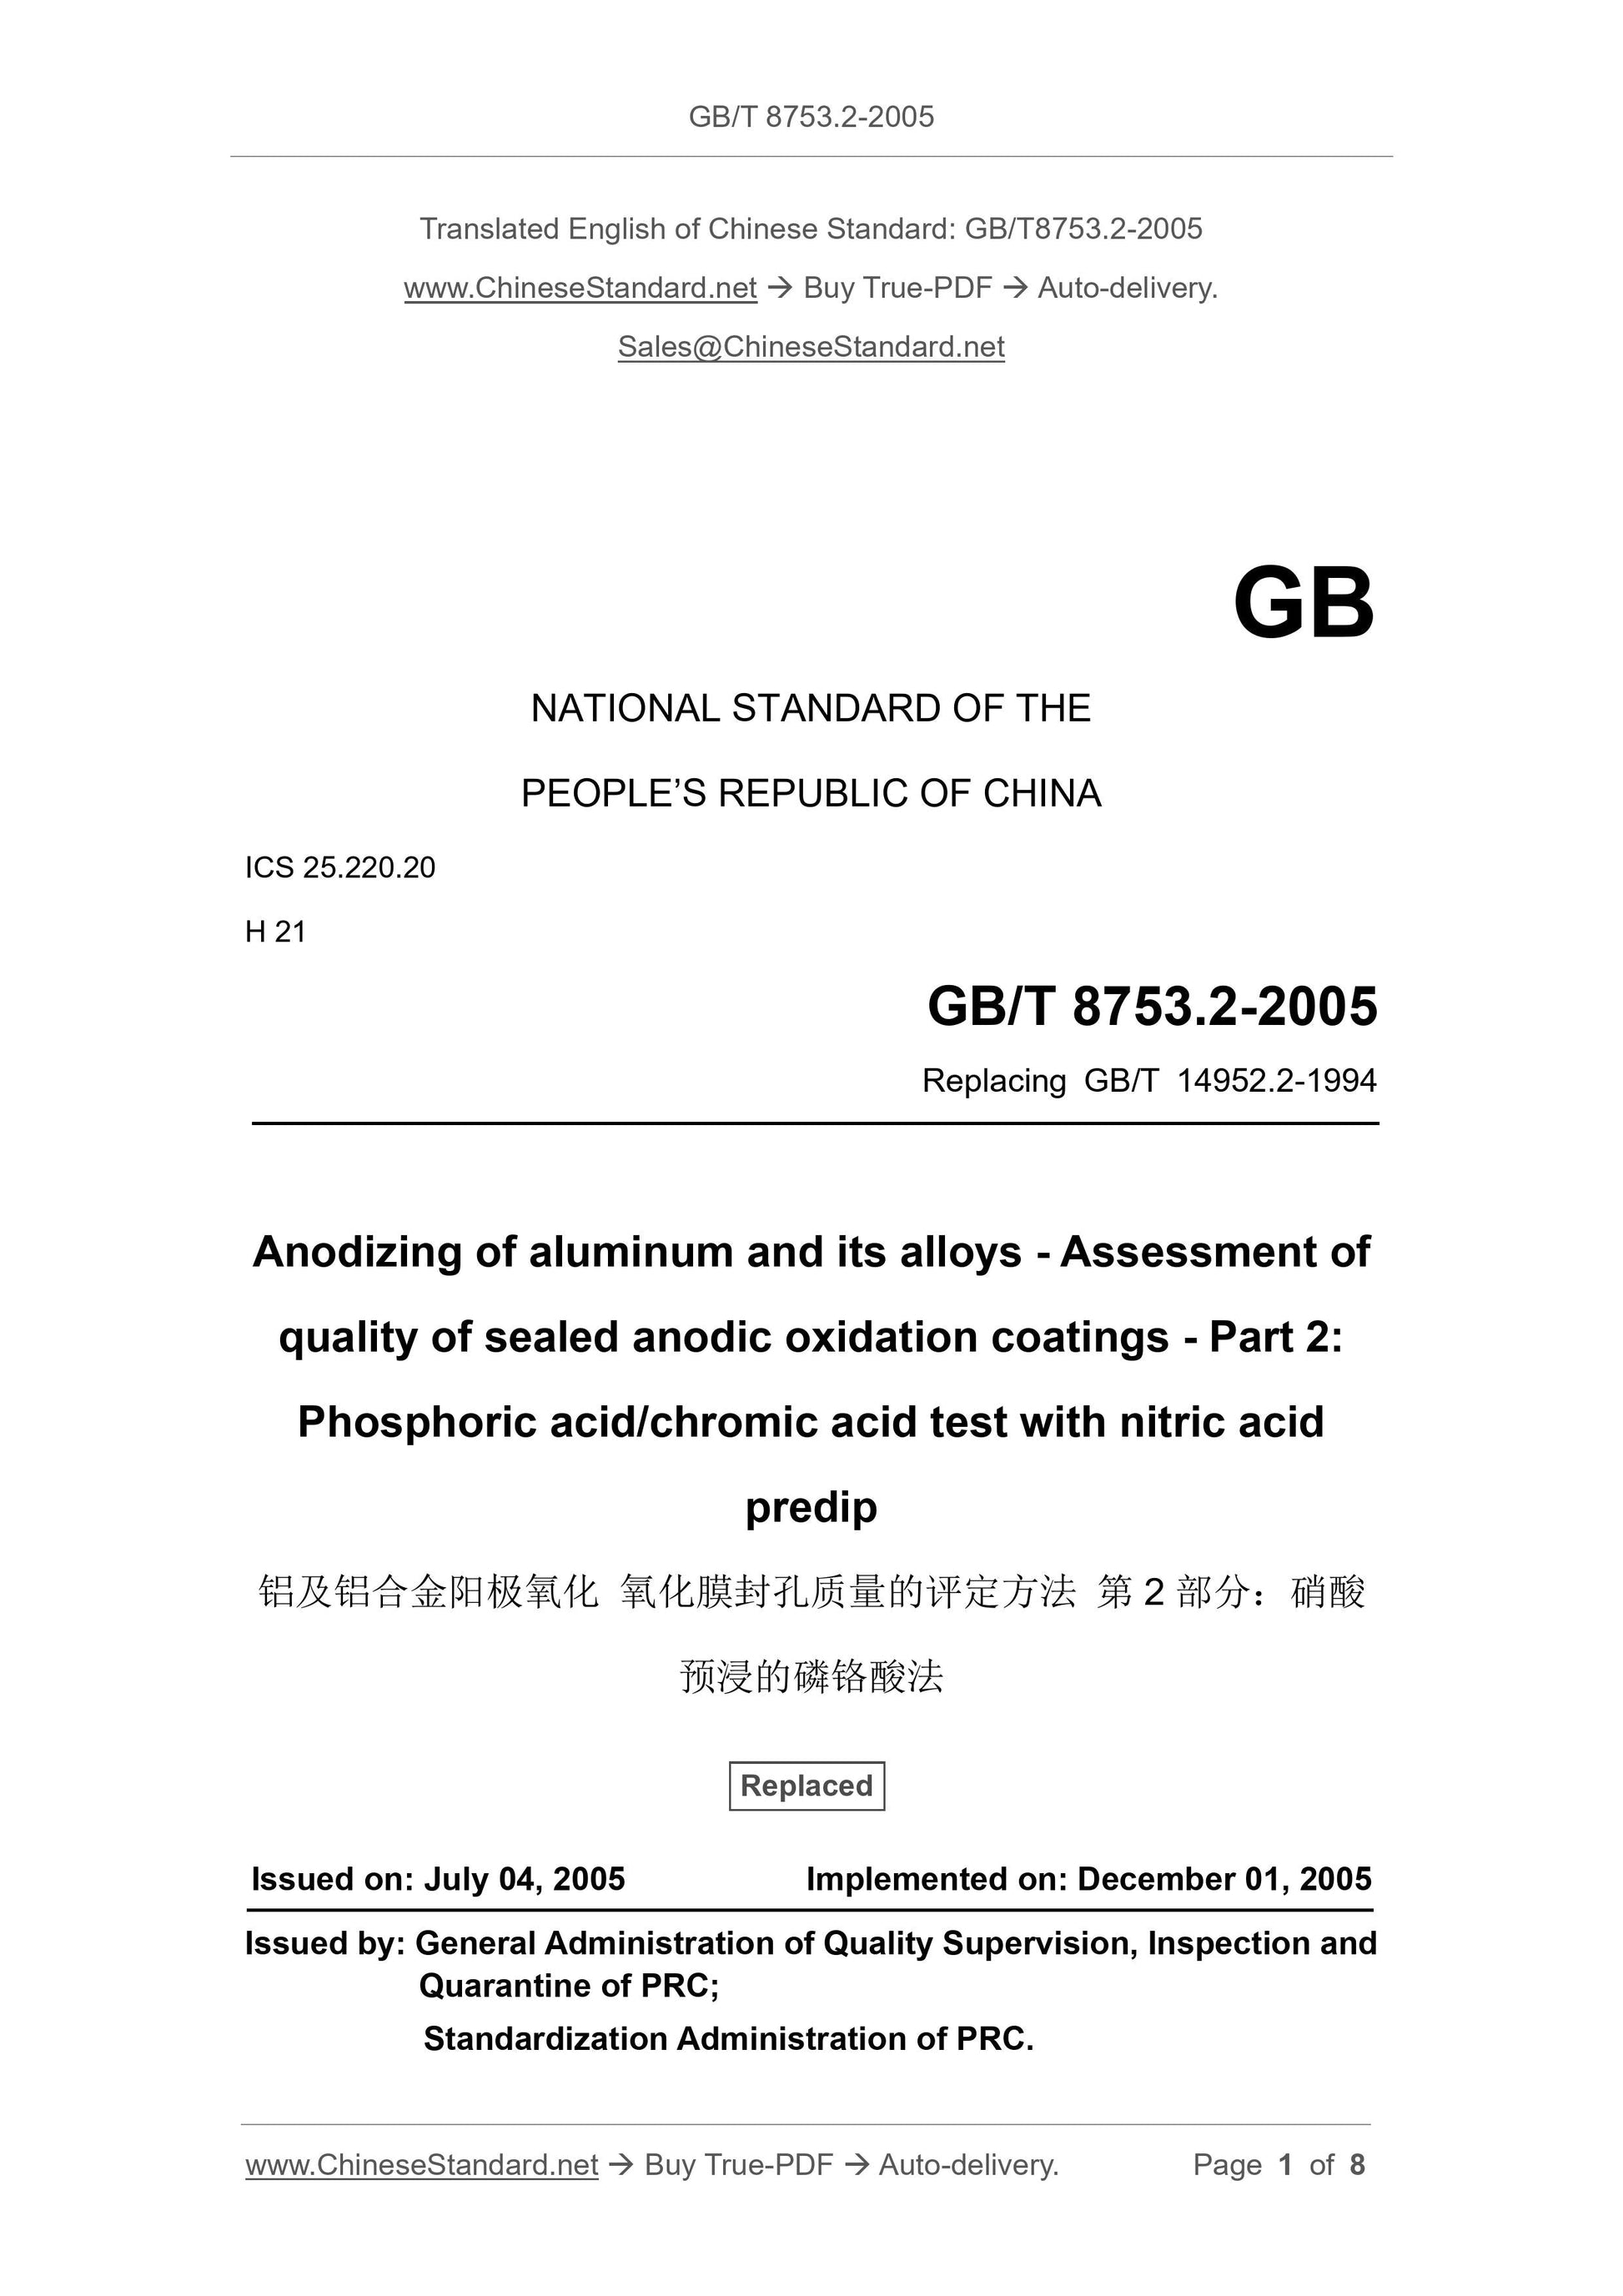 GB/T 8753.2-2005 Page 1